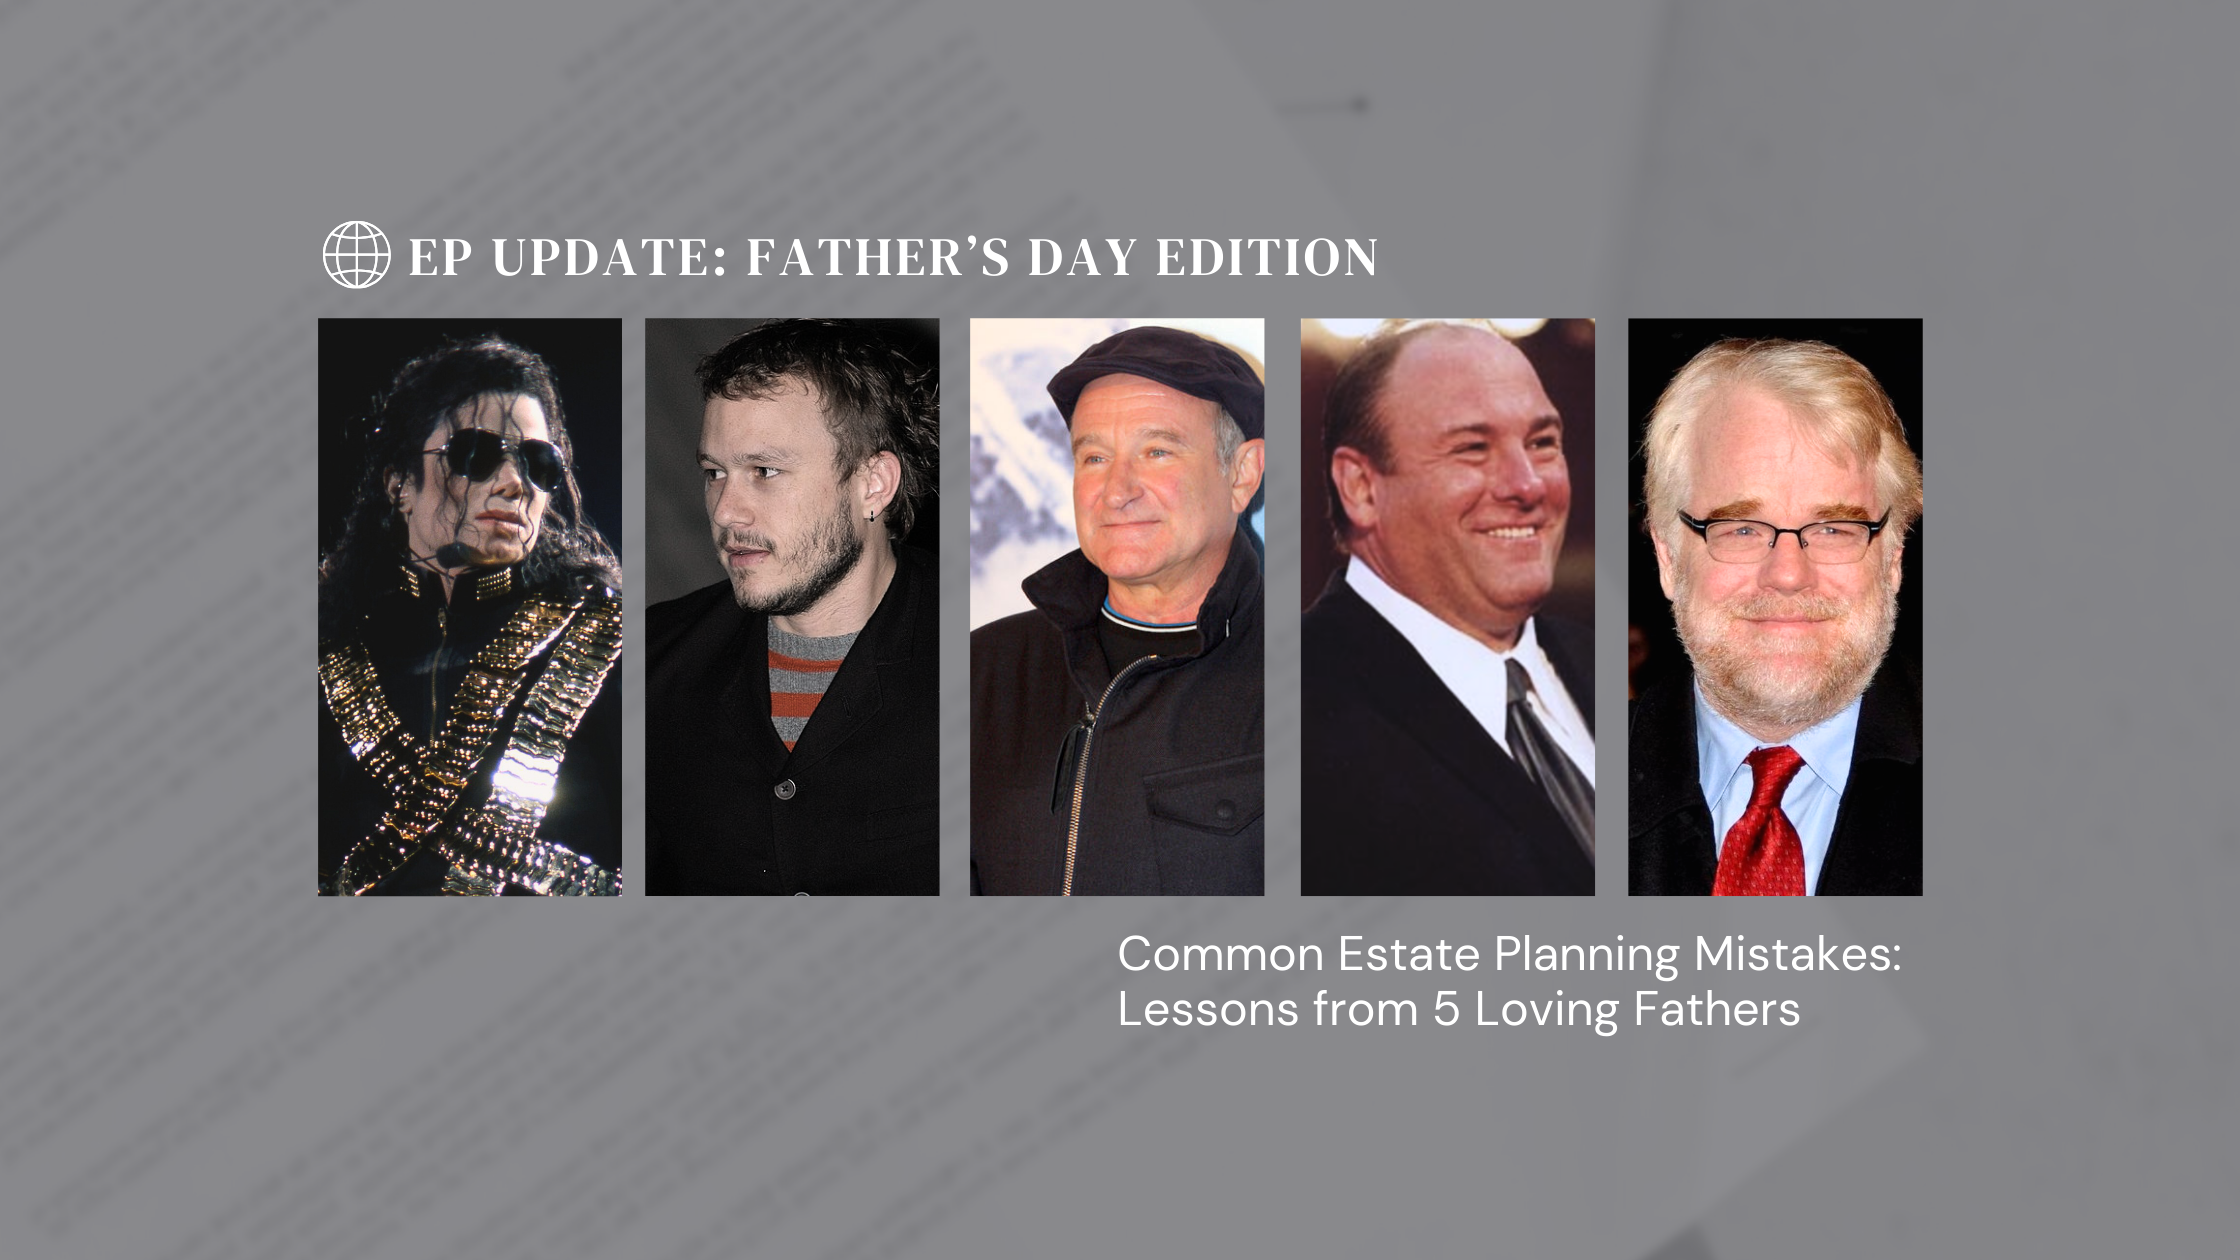 Common Estate Planning Mistakes: Lessons from 5 Loving Fathers